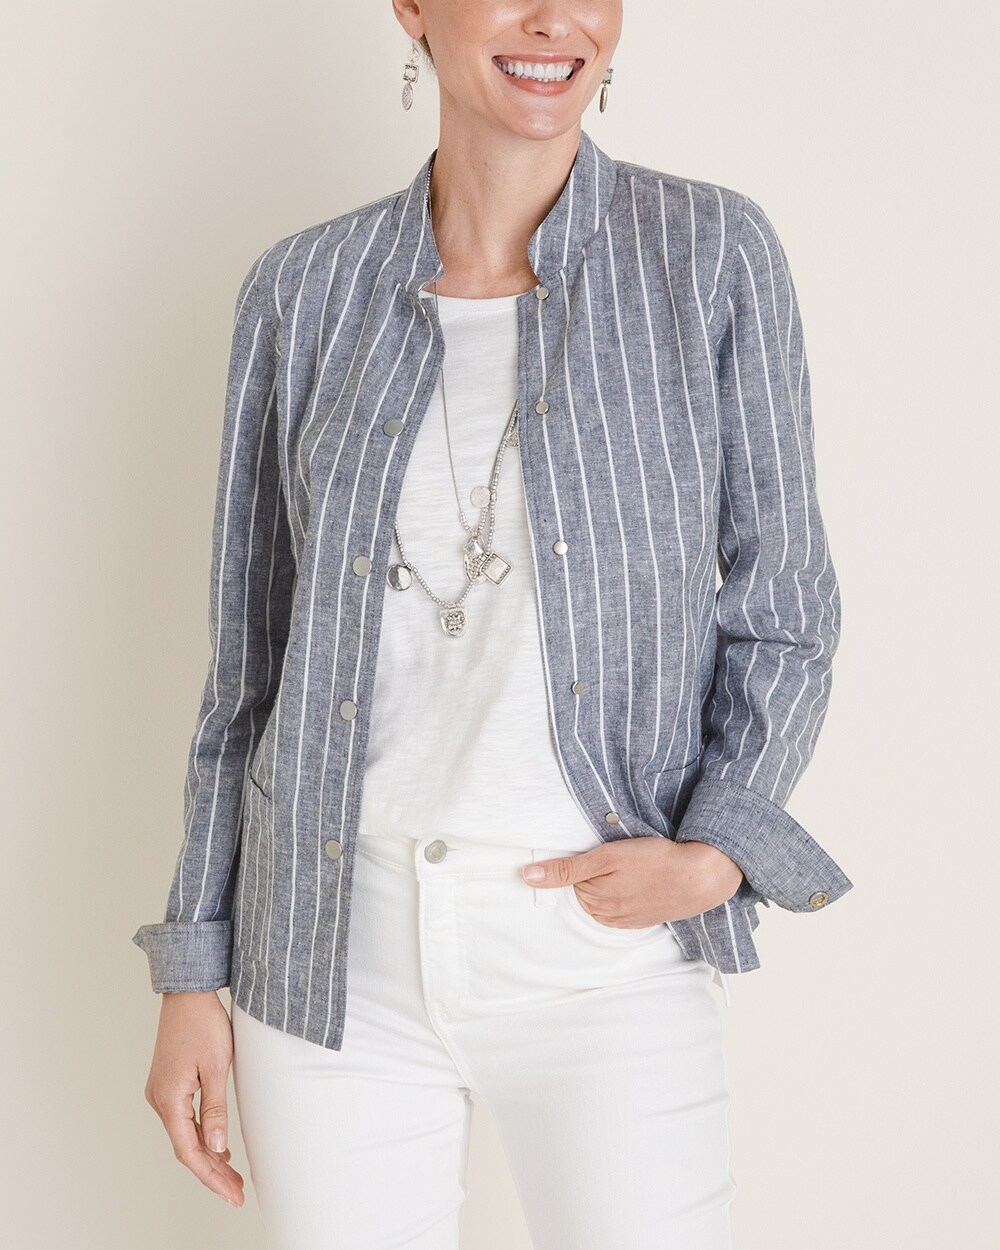 Reversible Striped to Solid Linen Jacket